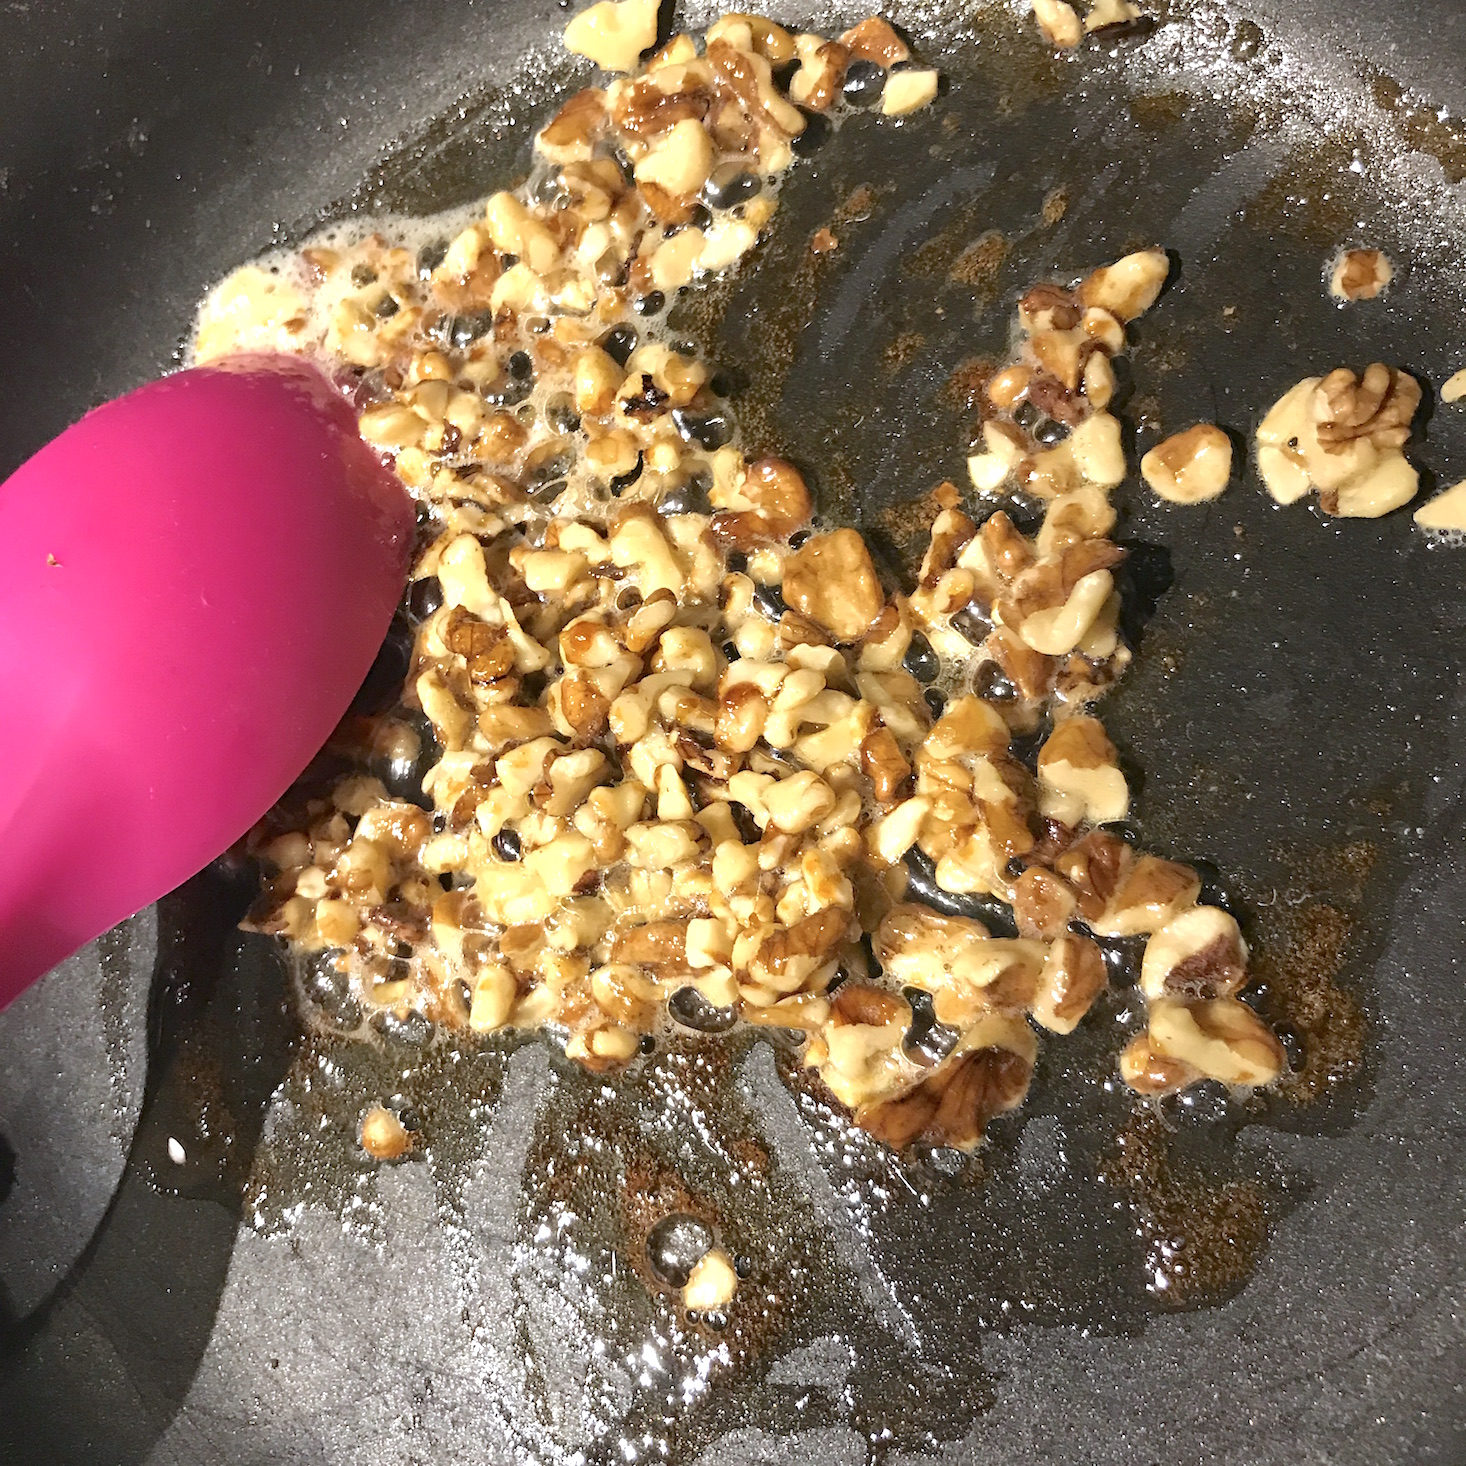 Plated February 2018 - coated nuts